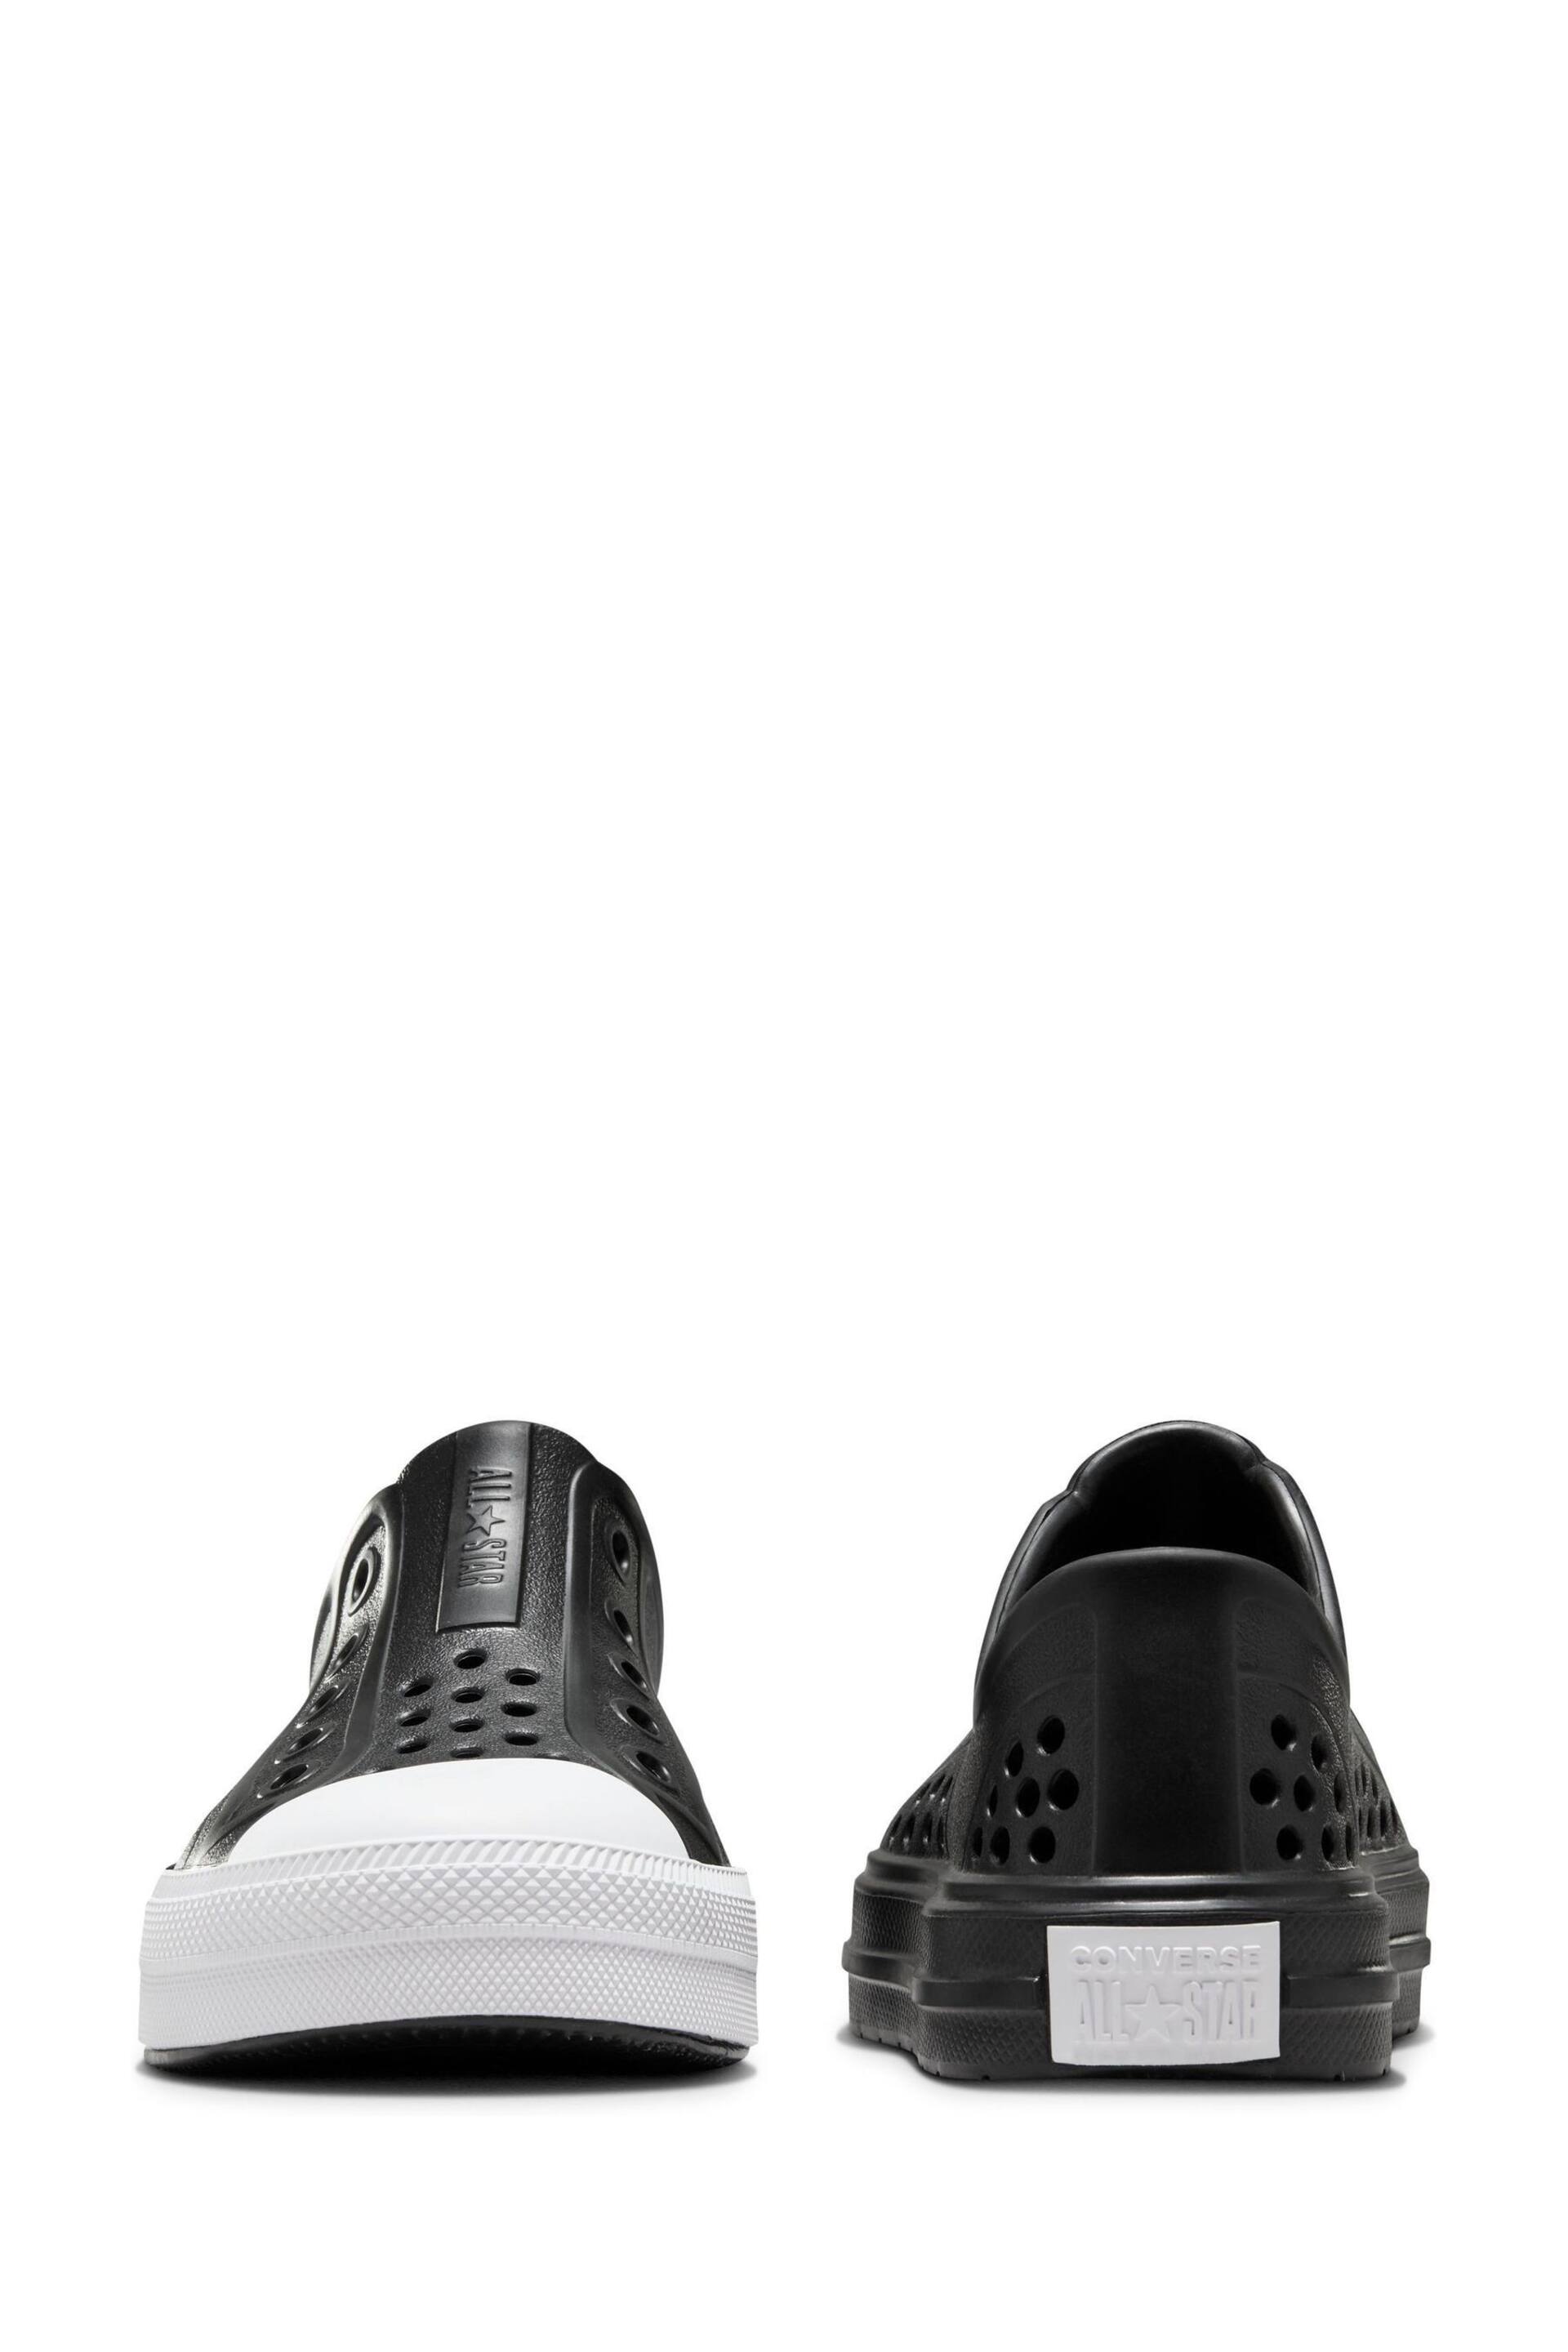 Converse Black Chuck Taylor All Star Play Lite Cx Sandals - Image 6 of 9